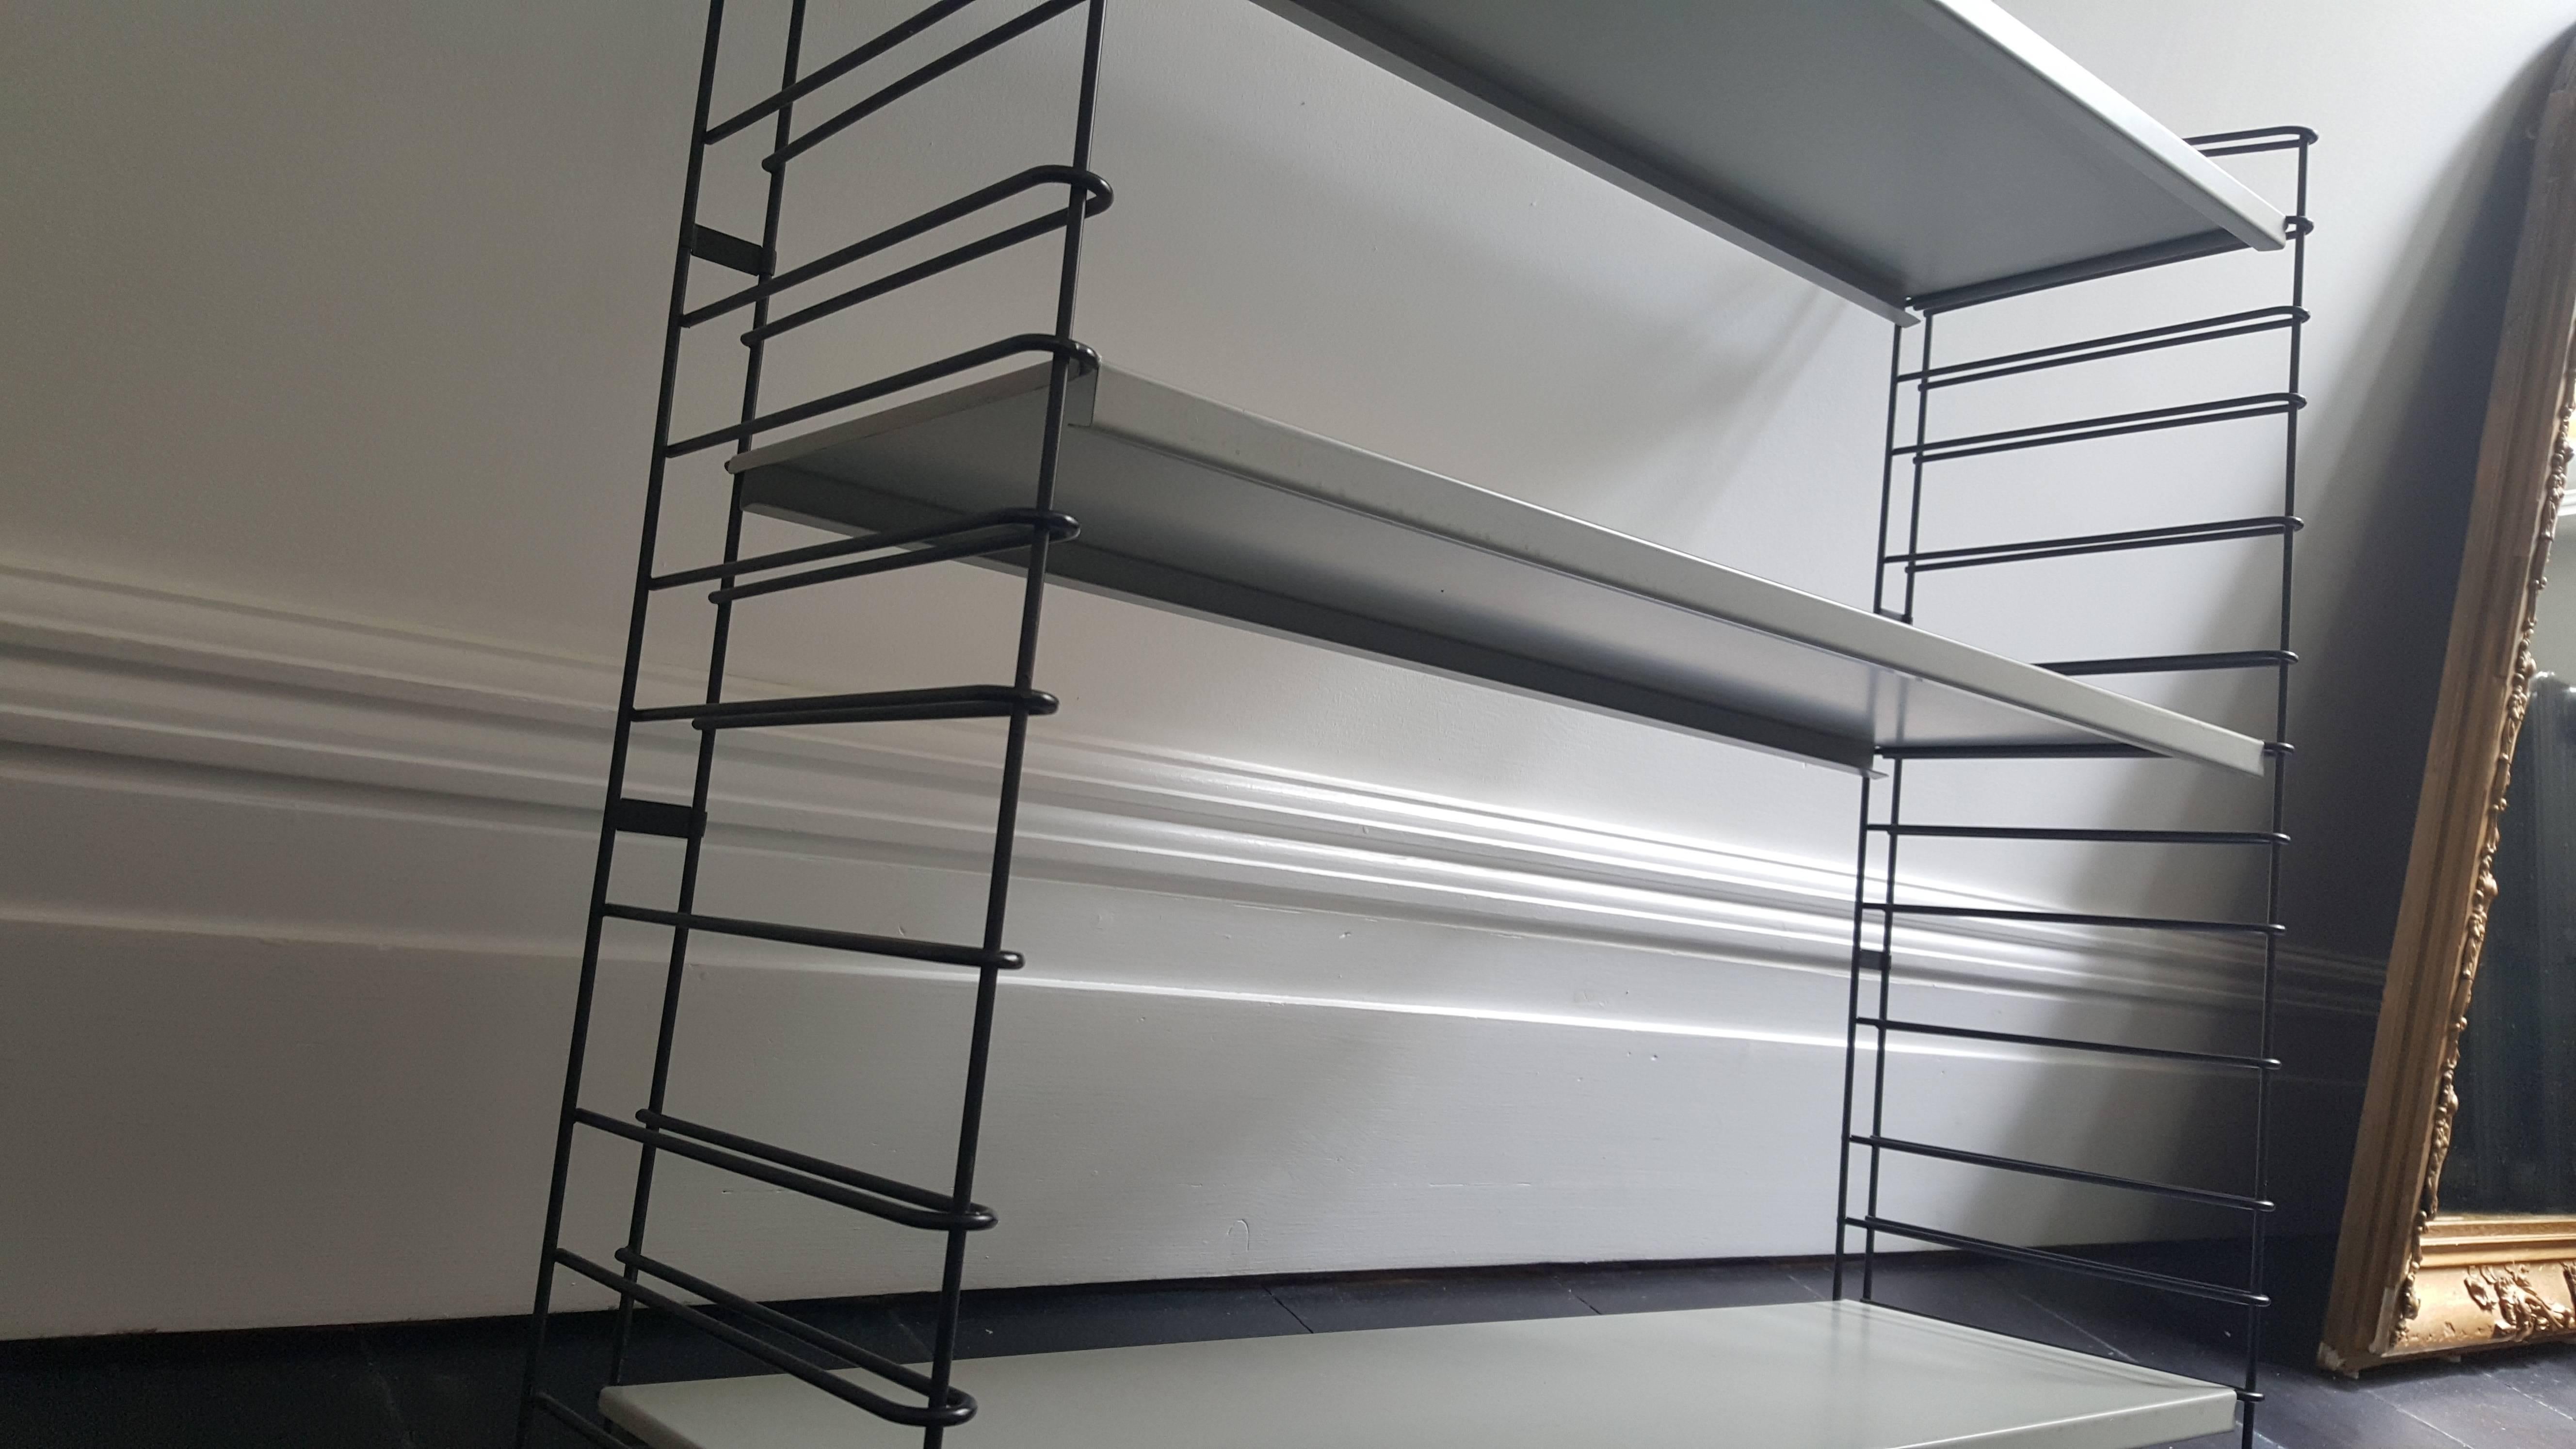 Eye-catching Classic vintage Dutch Tomado shelves or book racks designed mid-1950s. 

Powder coated frame and adjustable steel shelves (grey).

Global shipping available, please contact to discuss.